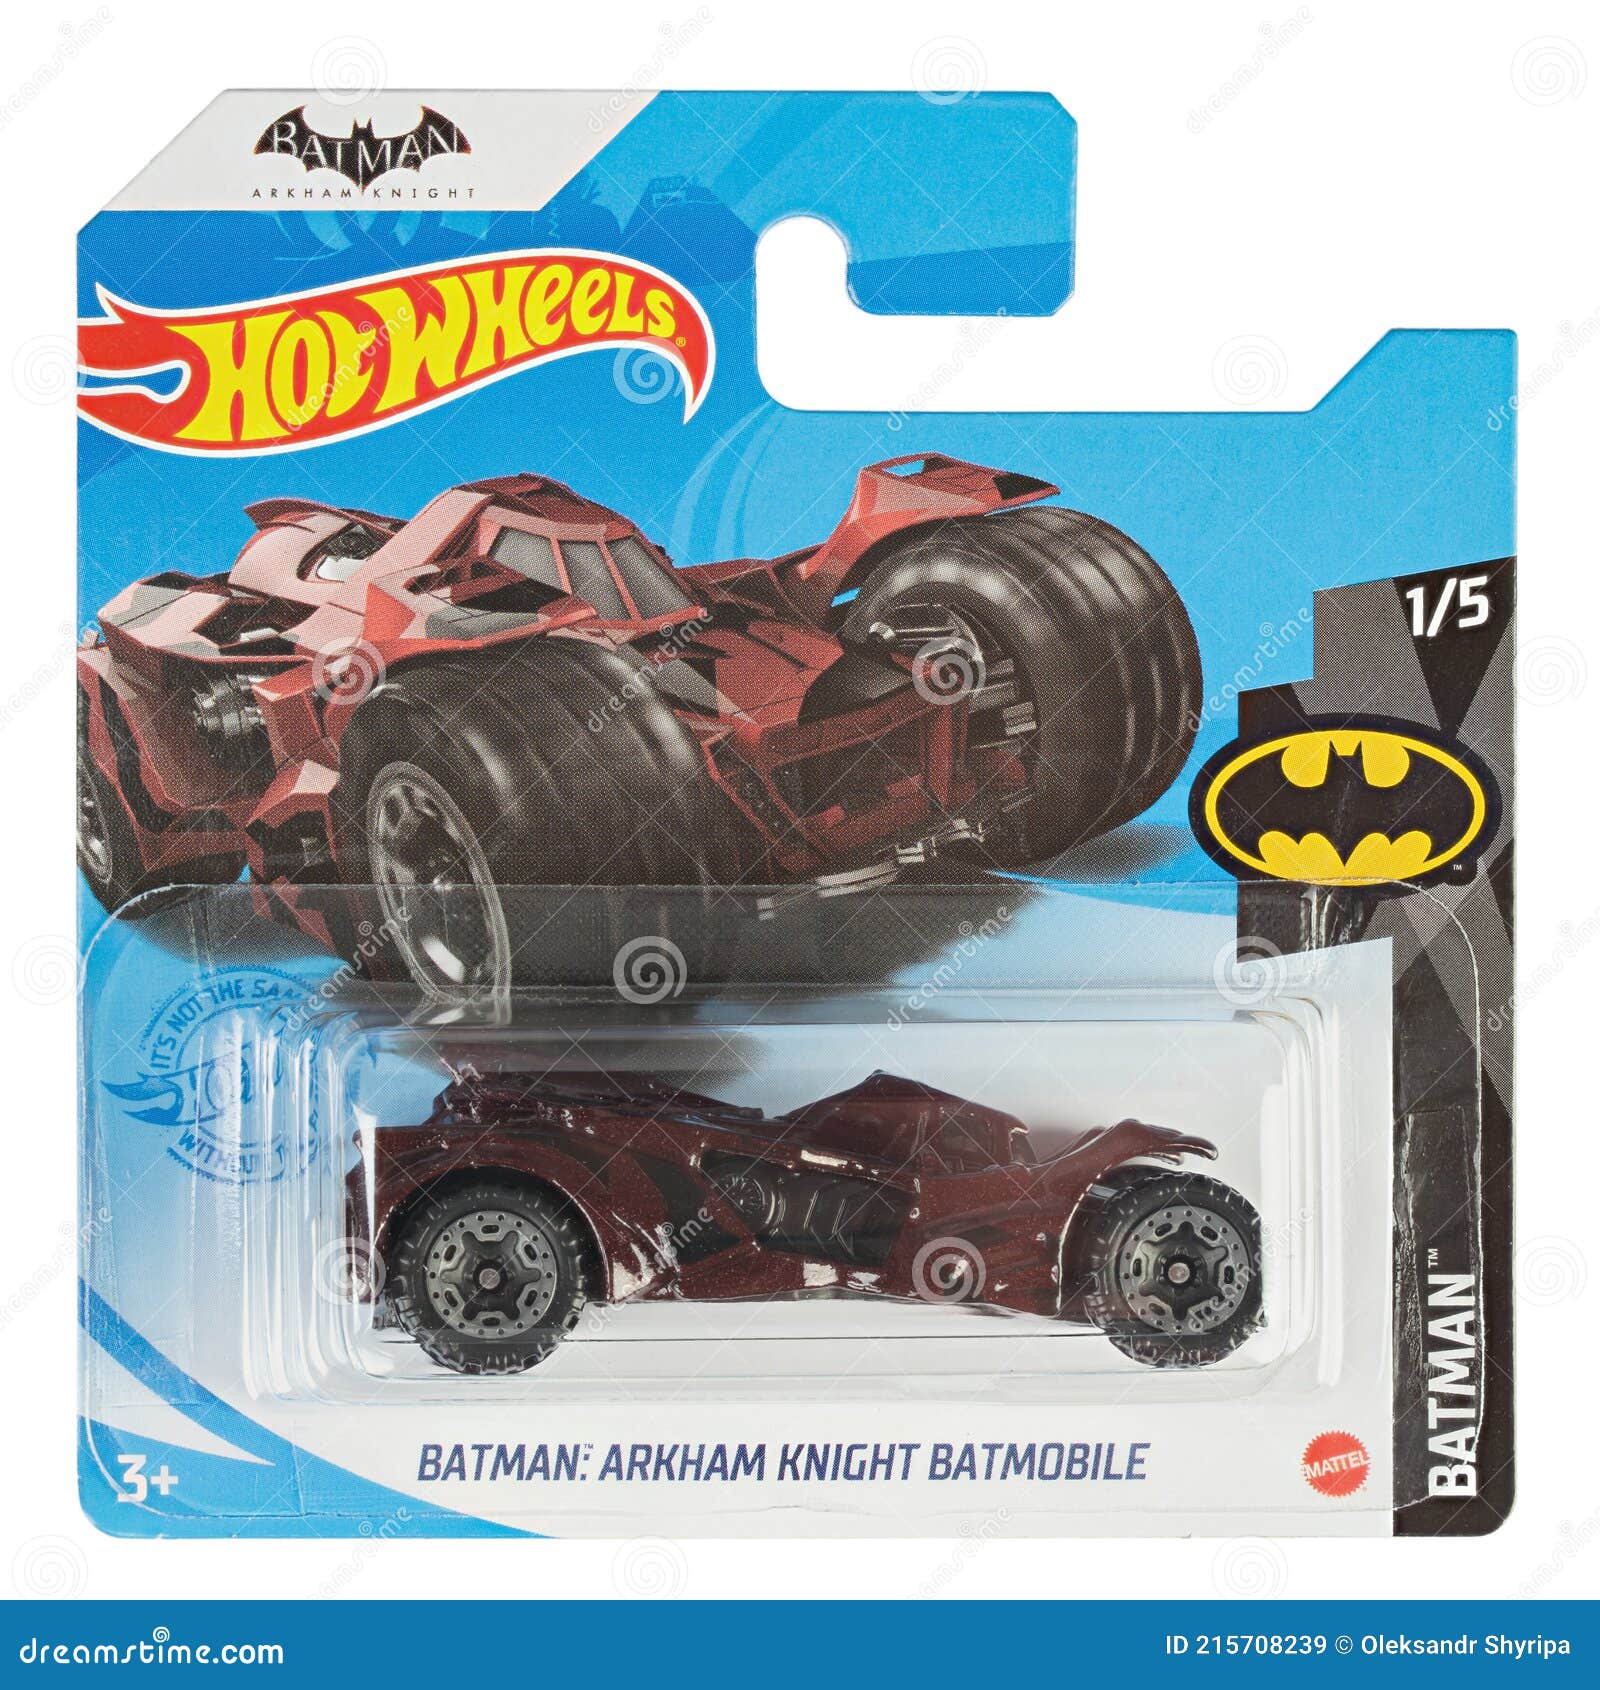 Hot Wheels Toy Car Batman: Arkham Knight Batmobile Close Up Picture. Wheels  is a Scale Die-cast Toy Cars by American Toy Maker Editorial Stock Image -  Image of life, galaxy: 215708239